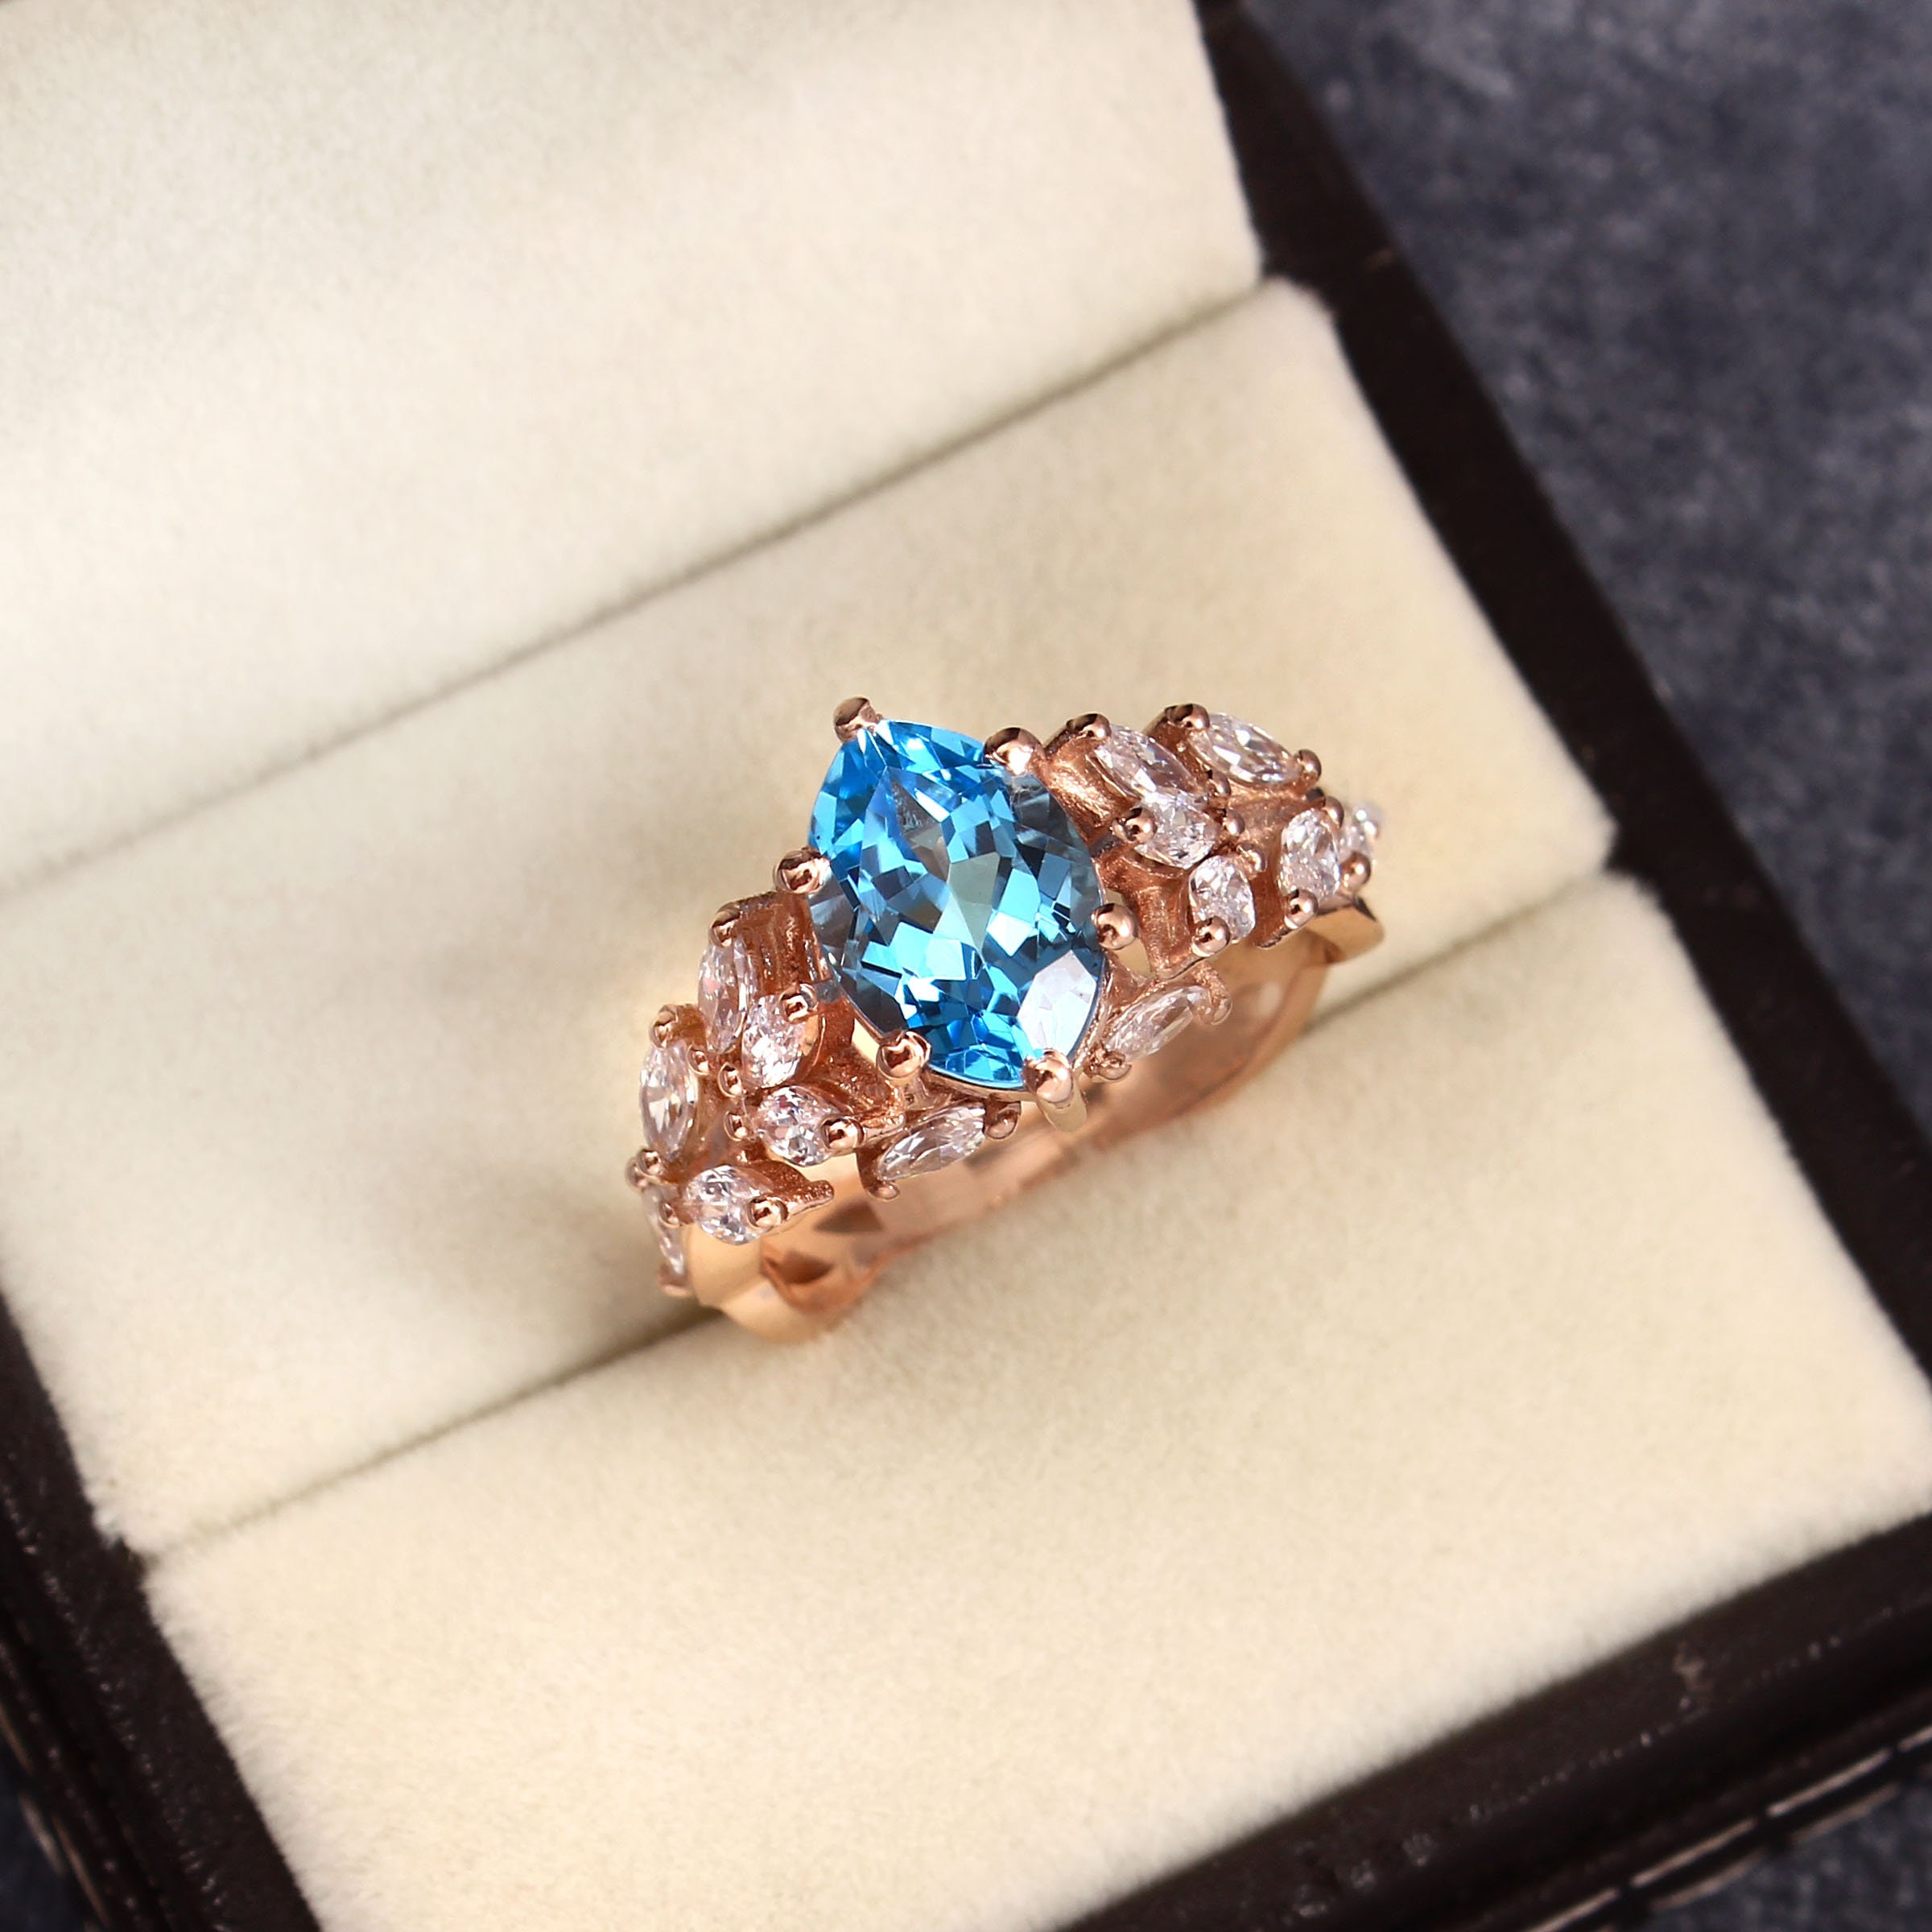 buy store Blue only 8 $995 Topaz Ring Ring, Diamond Topaz Gold (over Ring,  Handcrafted cts!), Minimalist Blue Estate & Jewelry, December large  Birthstone, Perfect for Weddings, Anniversary, Birthday or Gift for